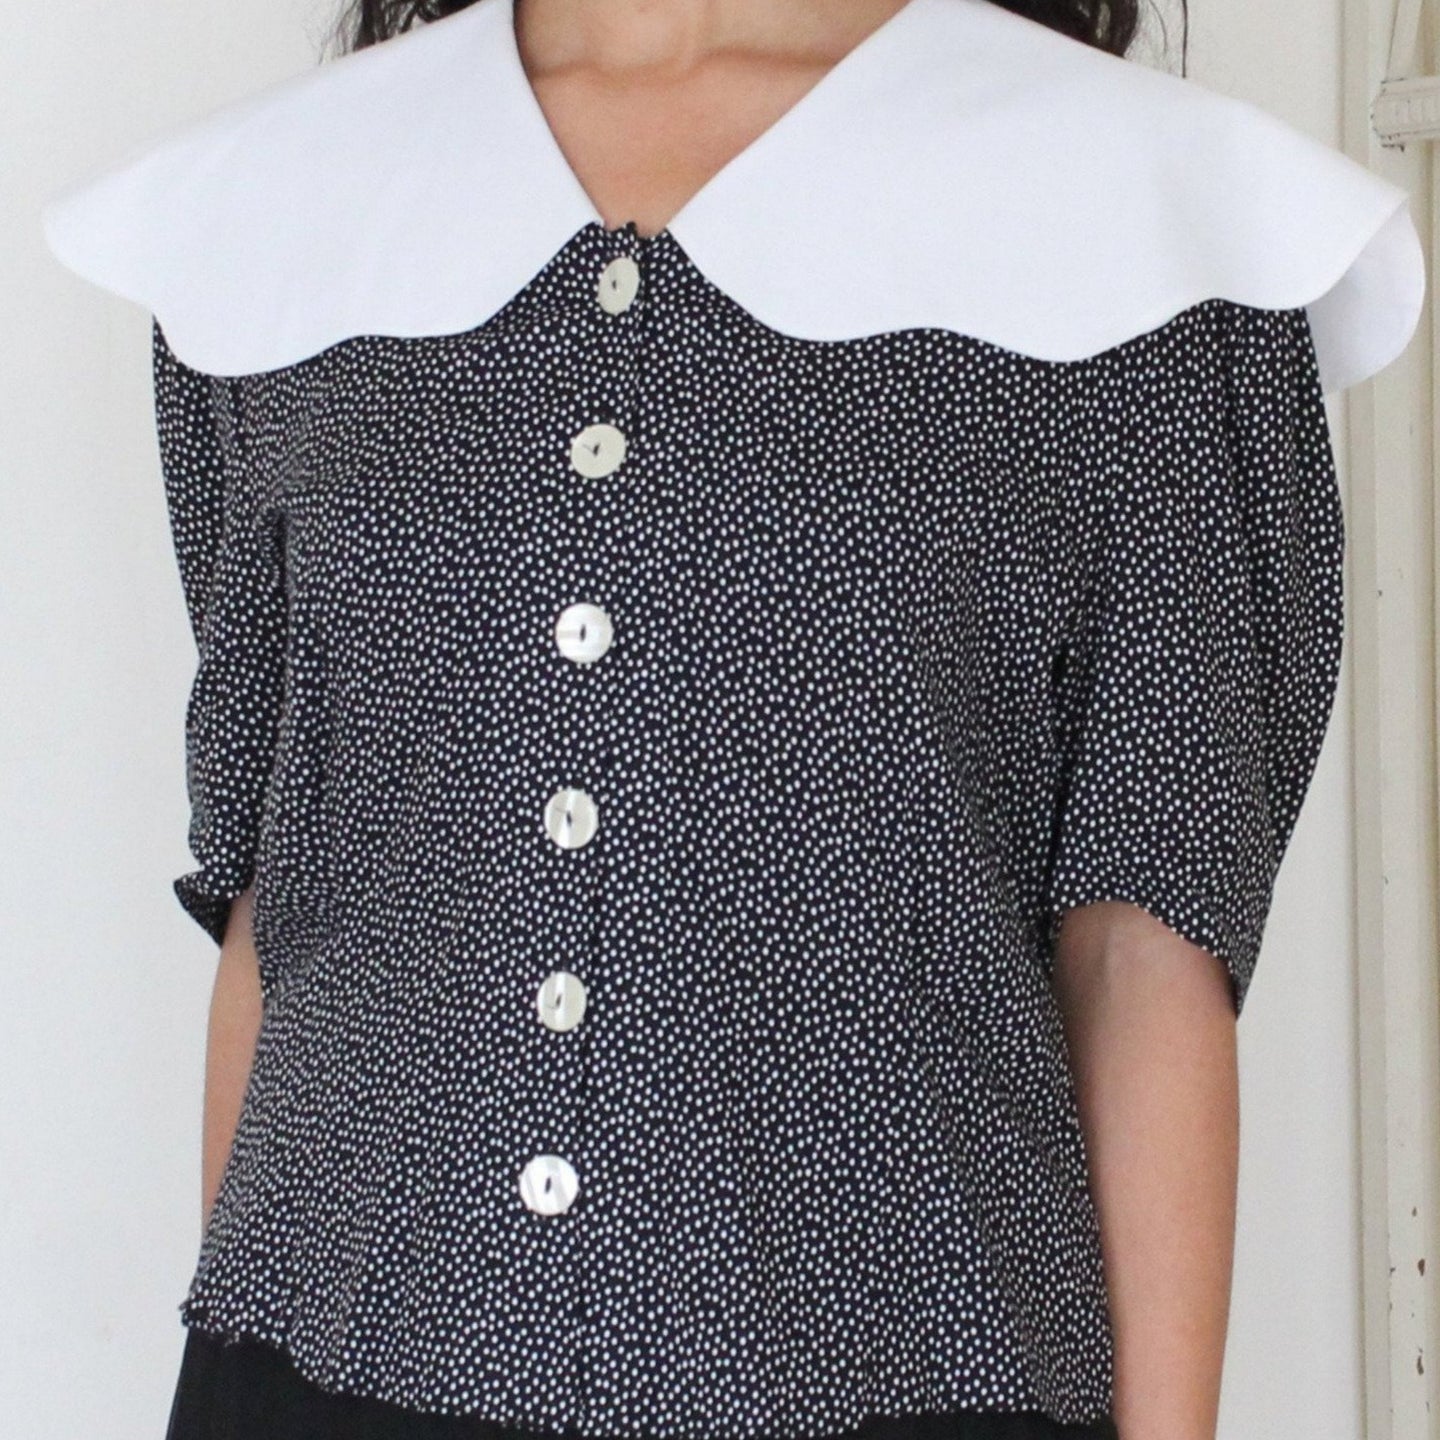 Vintage 80's polkadot blouse with wide collar, size S-M